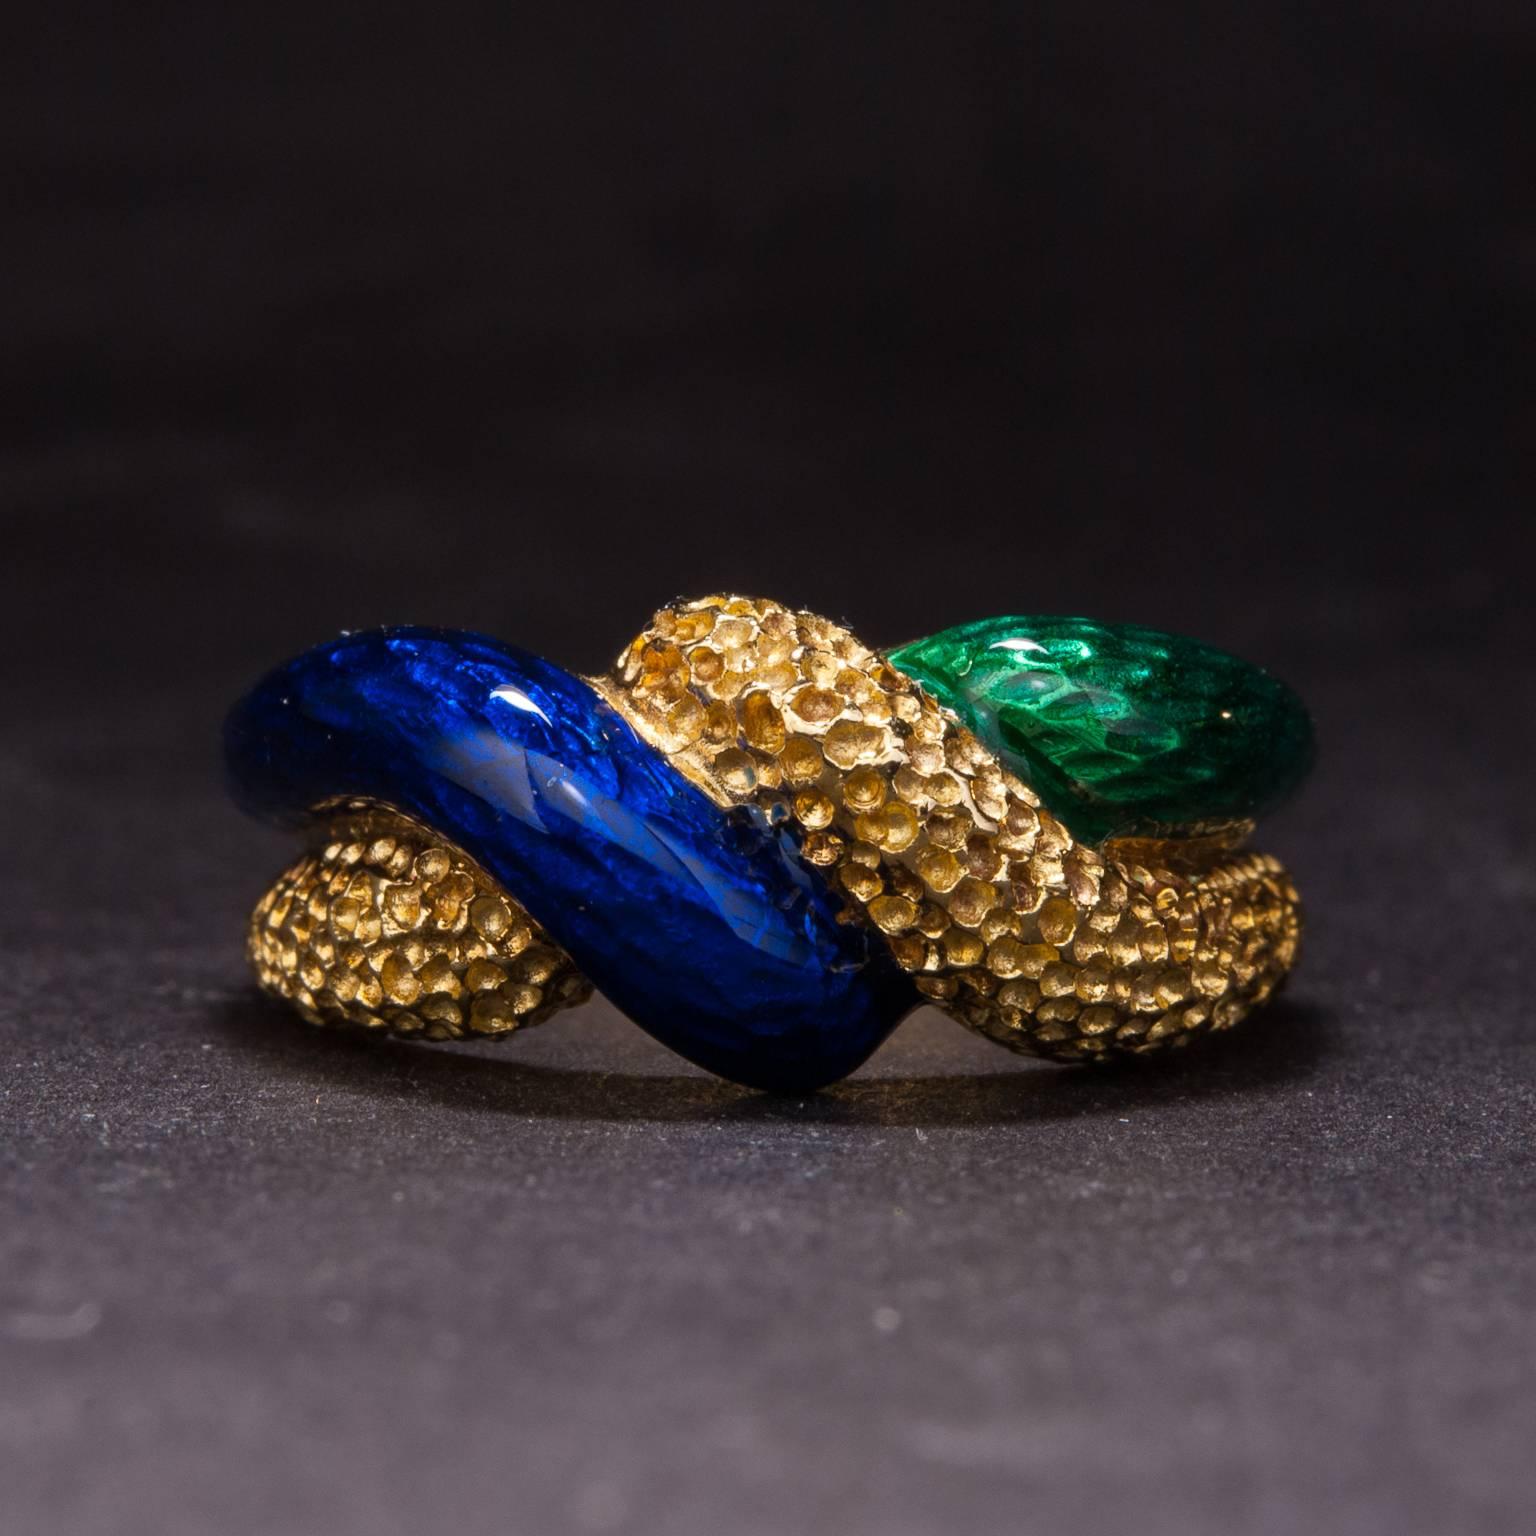 This lovely ring was hand-crafted circa 1960 and features beautiful blue and green enamel work along an 18k yellow gold mounting. This ring is currently size 7.5.